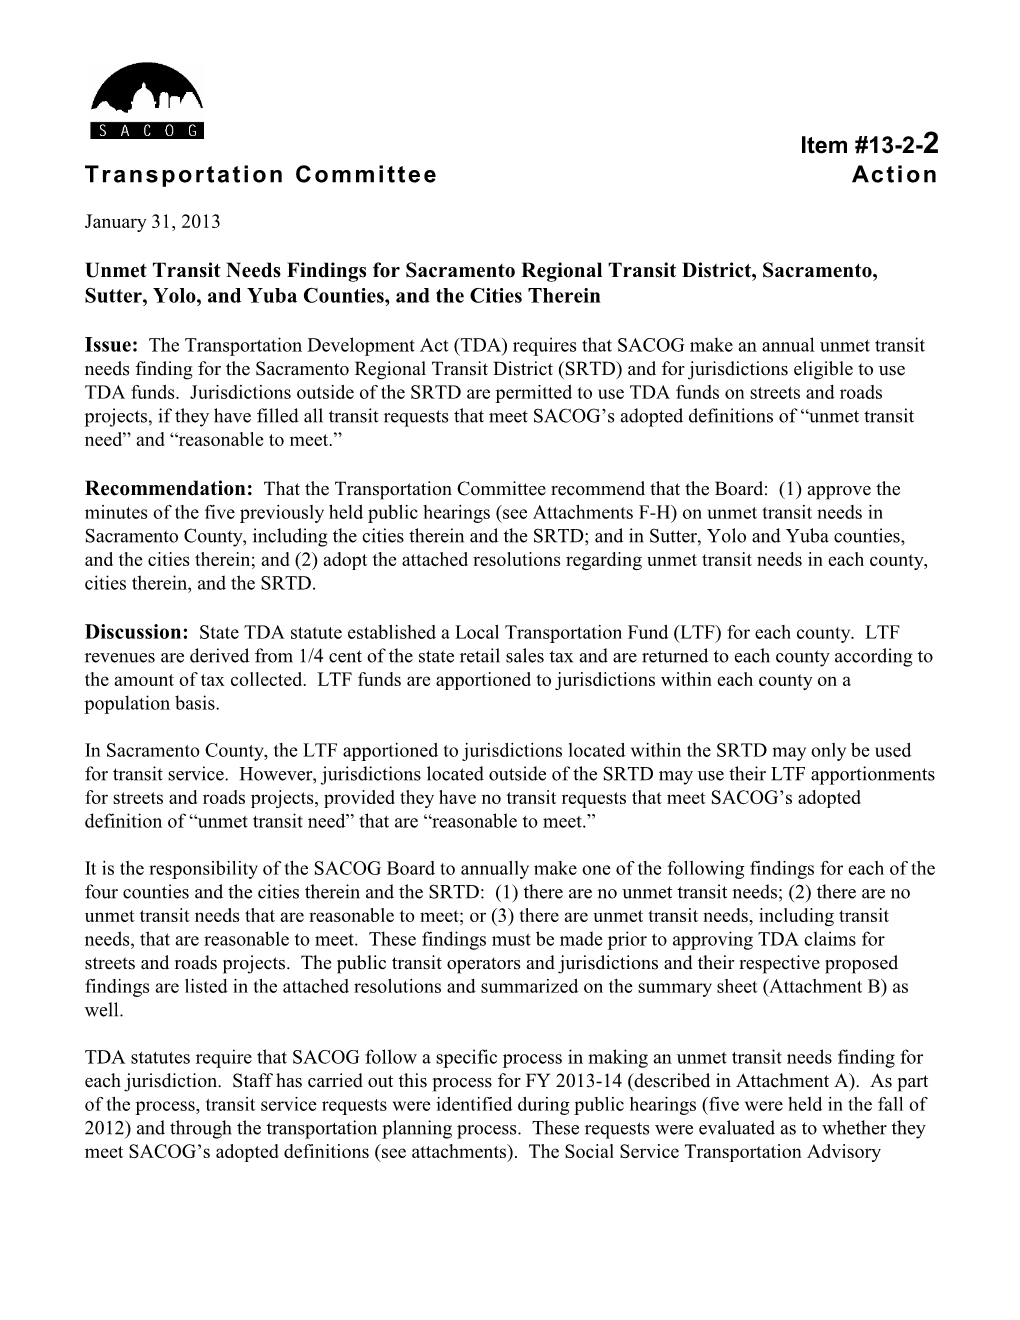 Item #13-2-2 Transportation Committee Action